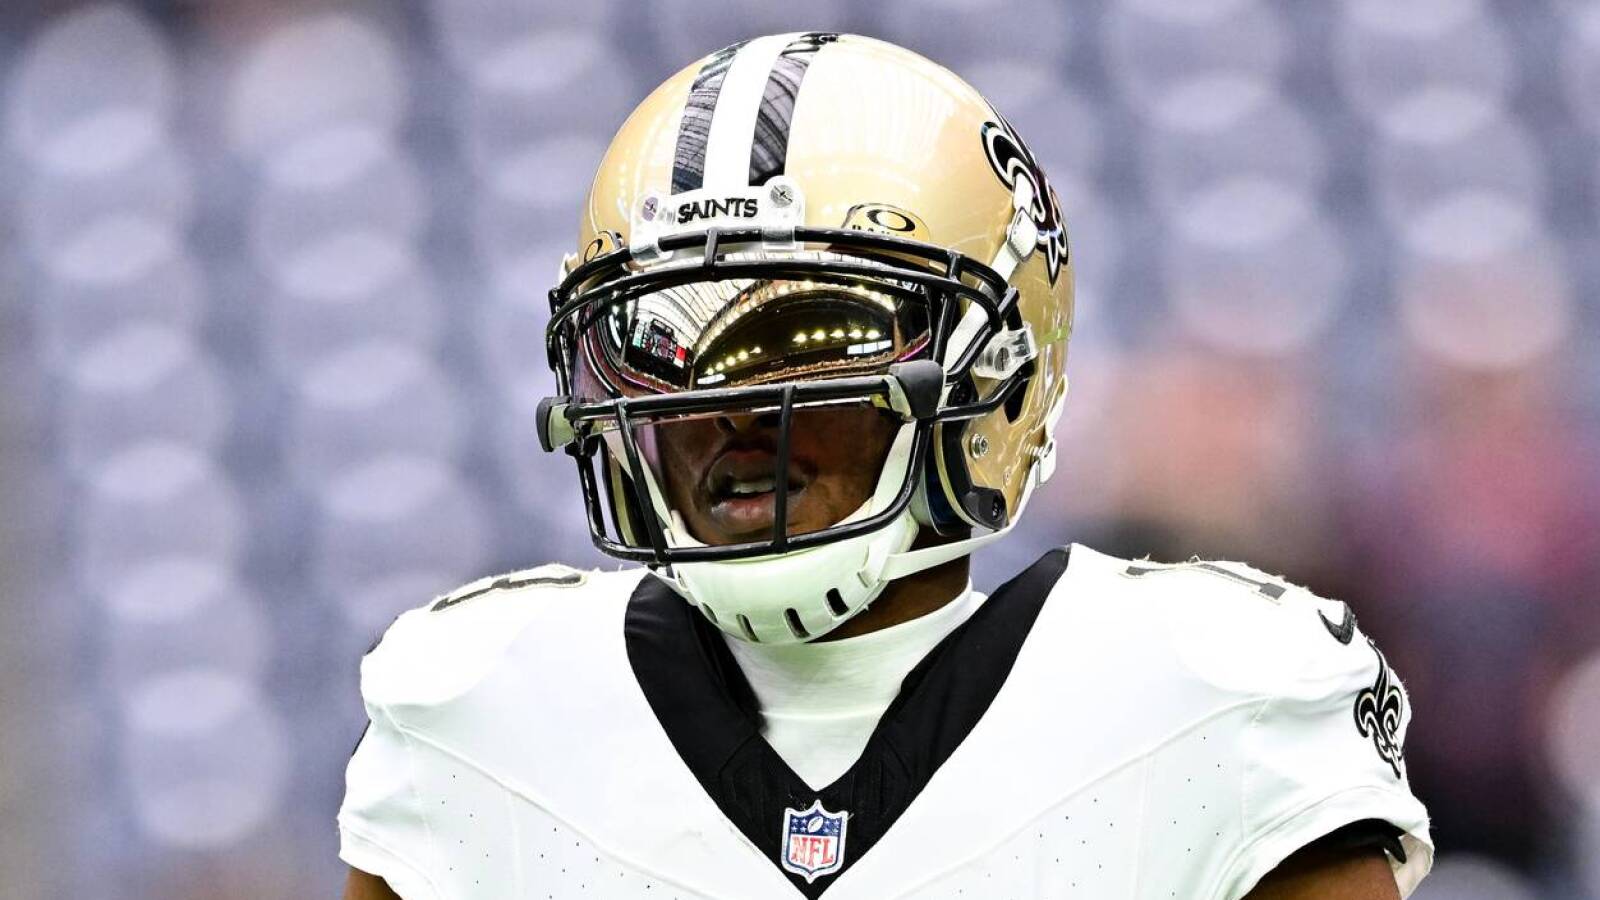 Saints WR blasts NFL columnist who broke the news of his release